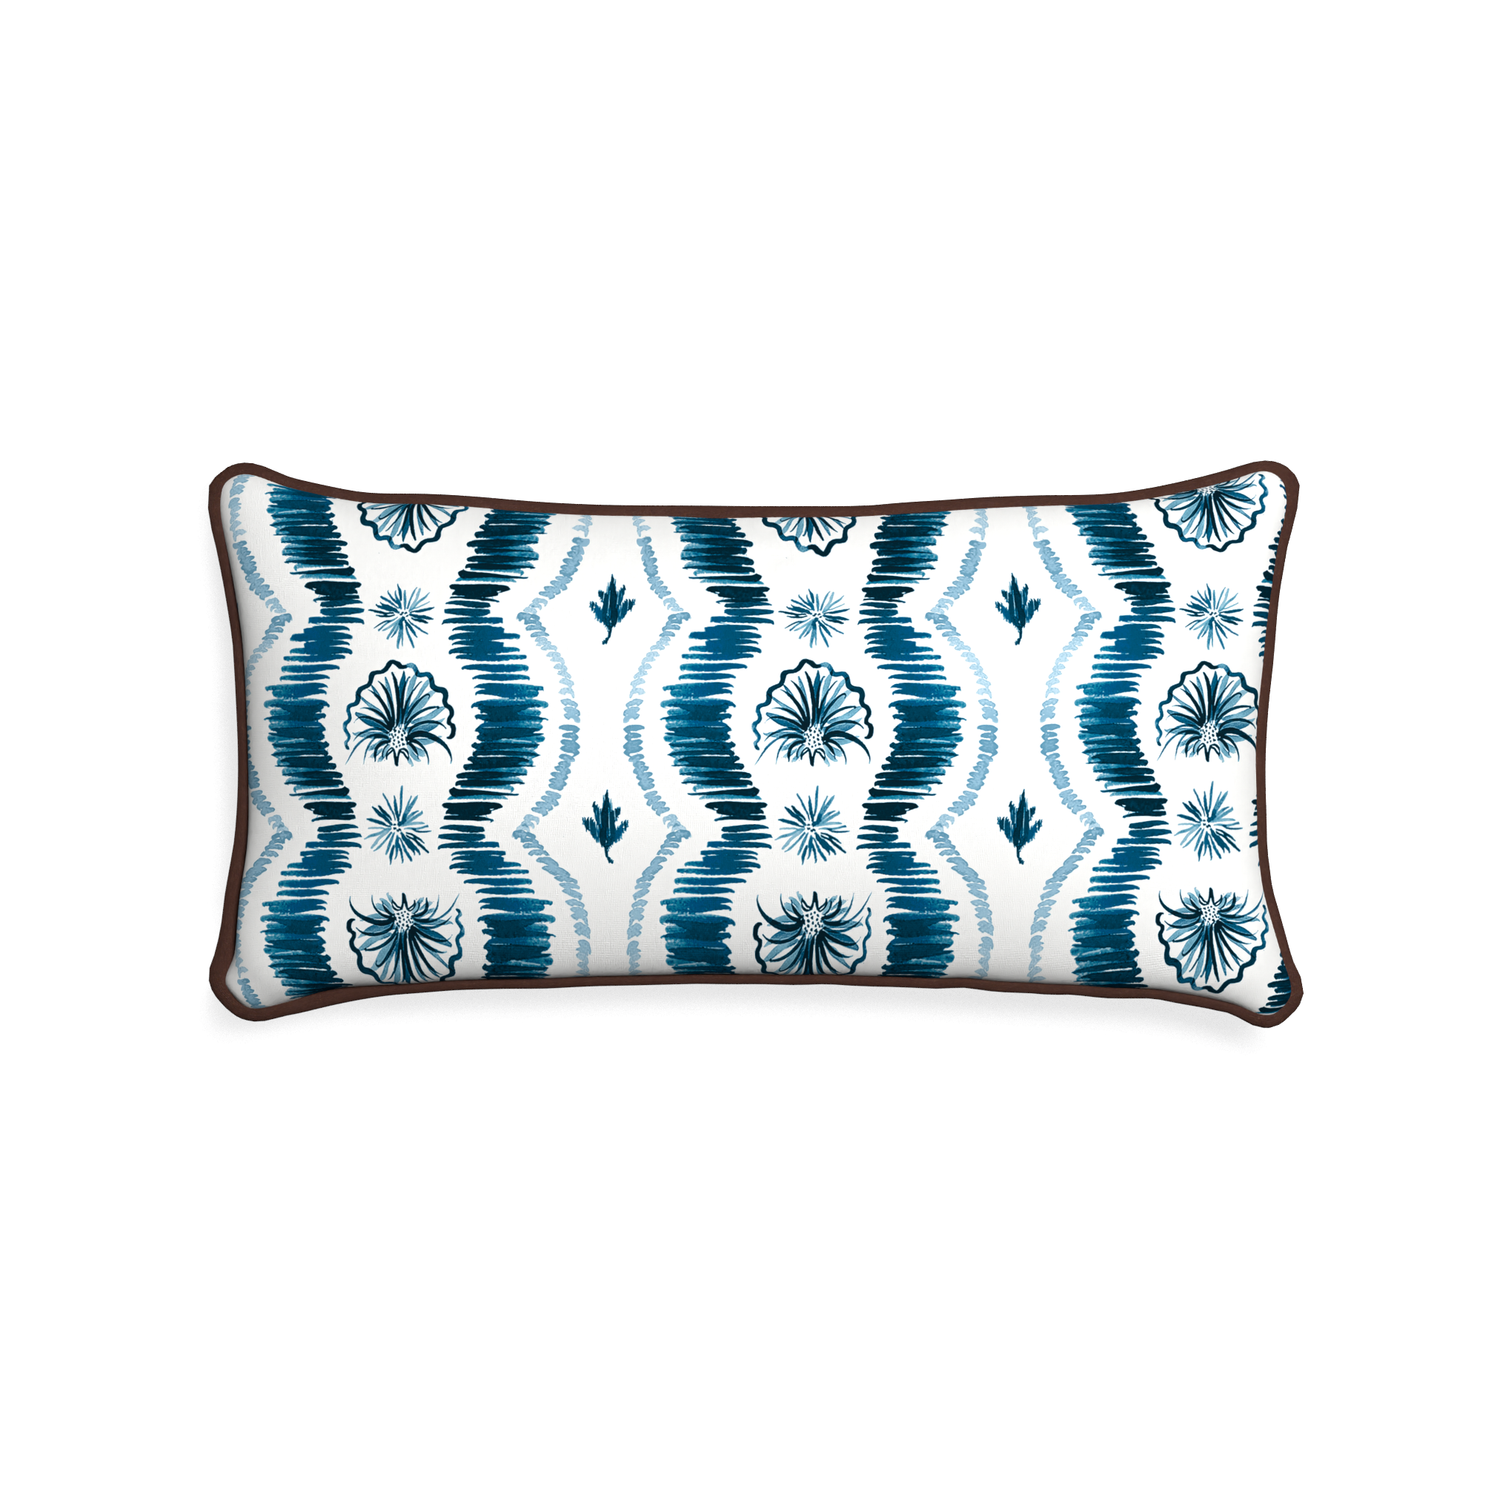 Midi-lumbar alice custom blue ikatpillow with w piping on white background